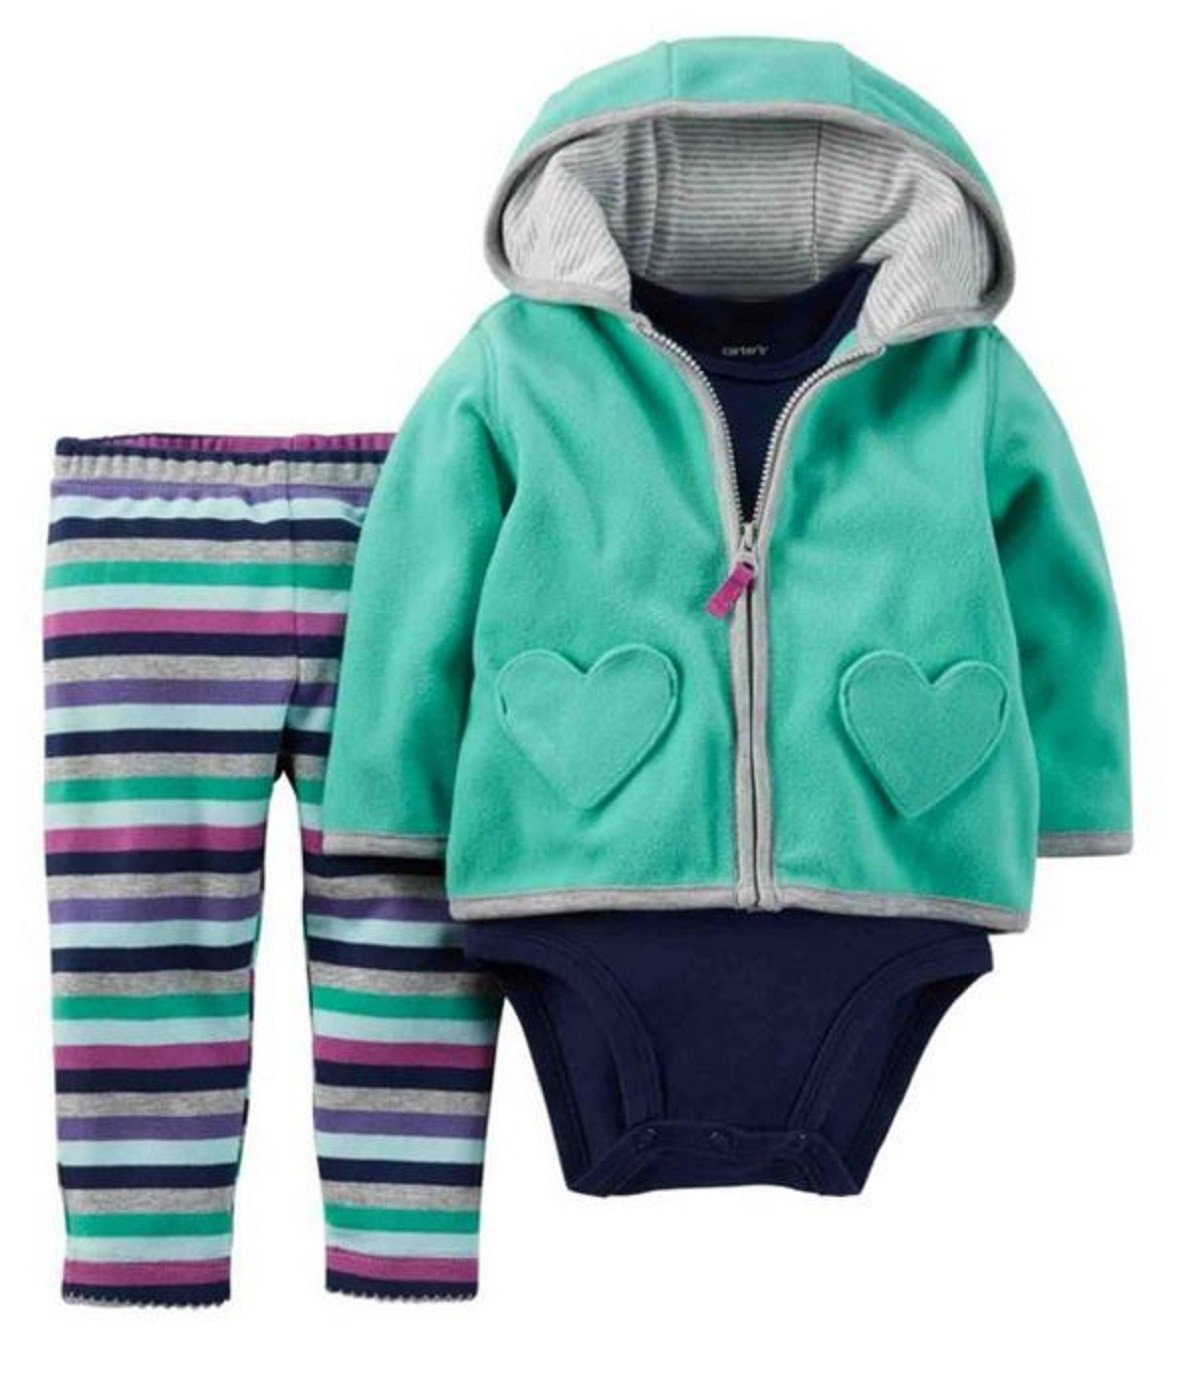 True Religion Baby 3 Piece Gift Box Set
 Carters Baby Girl s 3 Piece Matching Winter Outfit Set